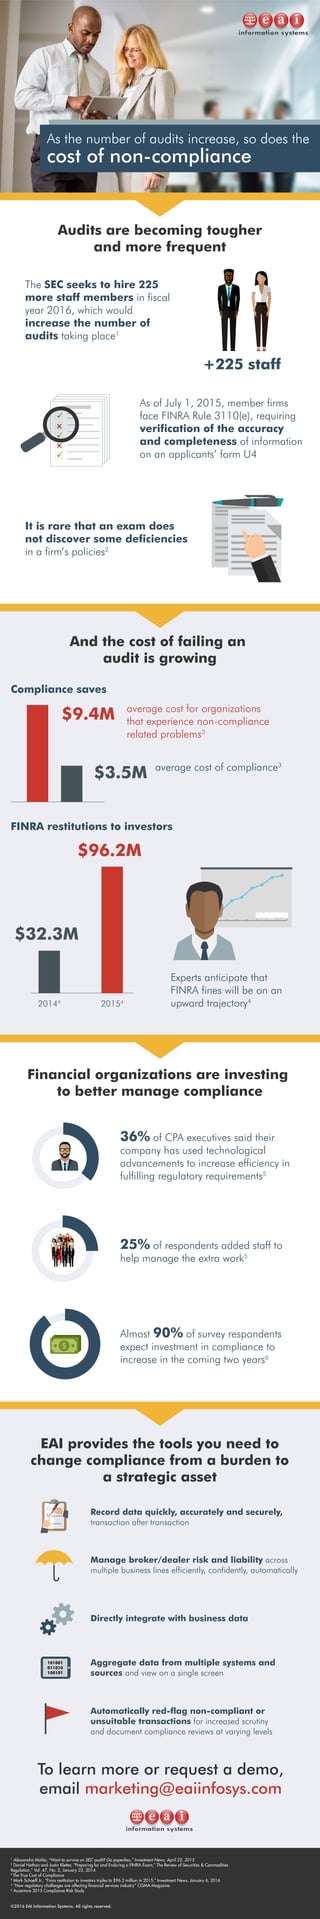 The SEC seeks to hire 225
more staff members in fiscal
year 2016, which would
increase the number of
audits taking place1
Compliance saves
FINRA restitutions to investors
As of July 1, 2015, member firms
face FINRA Rule 3110(e), requiring
verification of the accuracy
and completeness of information
on an applicants’ form U4
It is rare that an exam does
not discover some deficiencies
in a firm’s policies2
average cost for organizations
that experience non-compliance
related problems3
average cost of compliance3
Experts anticipate that
FINRA fines will be on an
upward trajectory4
36% of CPA executives said their
company has used technological
advancements to increase efficiency in
fulfilling regulatory requirements5
25% of respondents added staff to
help manage the extra work5
Almost 90% of survey respondents
expect investment in compliance to
increase in the coming two years6
$9.4M
$3.5M
+225 staff
To learn more or request a demo,
email marketing@eaiinfosys.com
1
Alessandra Malito, “Want to survive an SEC audit? Go paperless,” Investment News, April 22, 2015
2
Daniel Nathan and Justin Kletter, “Preparing for and Enduring a FINRA Exam,” The Review of Securities & Commodities
Regulation,” Vol. 47, No. 2, January 22, 2014
3
The True Cost of Compliance
4
Mark Schoeff Jr., “Finra restitution to investors triples to $96.2 million in 2015,” Investment News, January 6, 2016
5
“How regulatory challenges are affecting ﬁnancial services industry” CGMA Magazine
6
Accenture 2015 Compliance Risk Study
EAI provides the tools you need to
change compliance from a burden to
a strategic asset
Manage broker/dealer risk and liability across
multiple business lines efficiently, confidently, automatically
©2016 EAI Information Systems. All rights reserved.
$96.2M
$32.3M
20144
20154
As the number of audits increase, so does the
cost of non-compliance
Audits are becoming tougher
and more frequent
And the cost of failing an
audit is growing
Financial organizations are investing
to better manage compliance
Record data quickly, accurately and securely,
transaction after transaction
Automatically red-flag non-compliant or
unsuitable transactions for increased scrutiny
and document compliance reviews at varying levels
Aggregate data from multiple systems and
sources and view on a single screen
Directly integrate with business data
101001
011010
100101
 